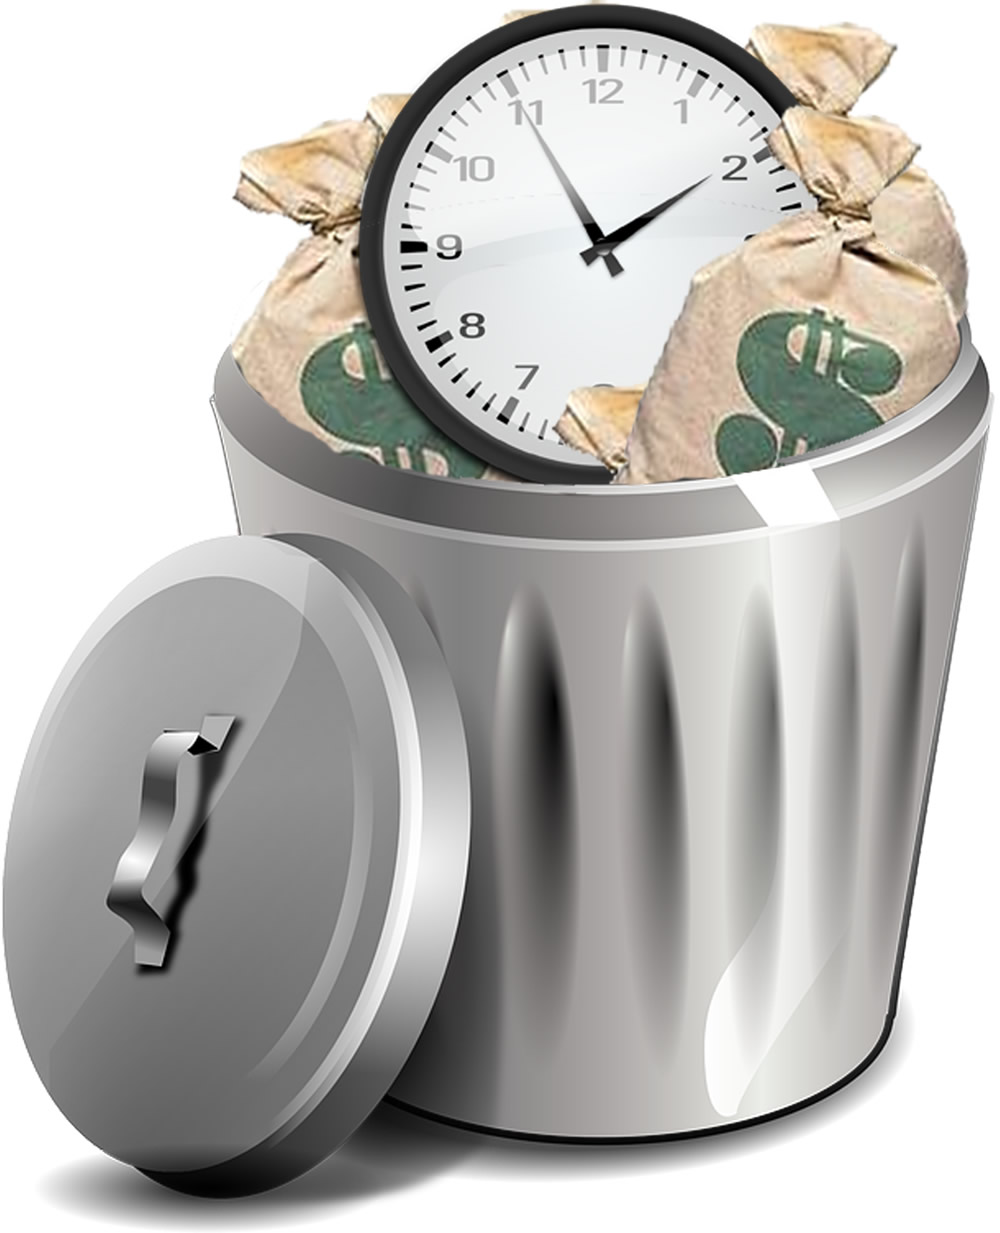 Jettison money and time wasters so that there is more time for productive selling